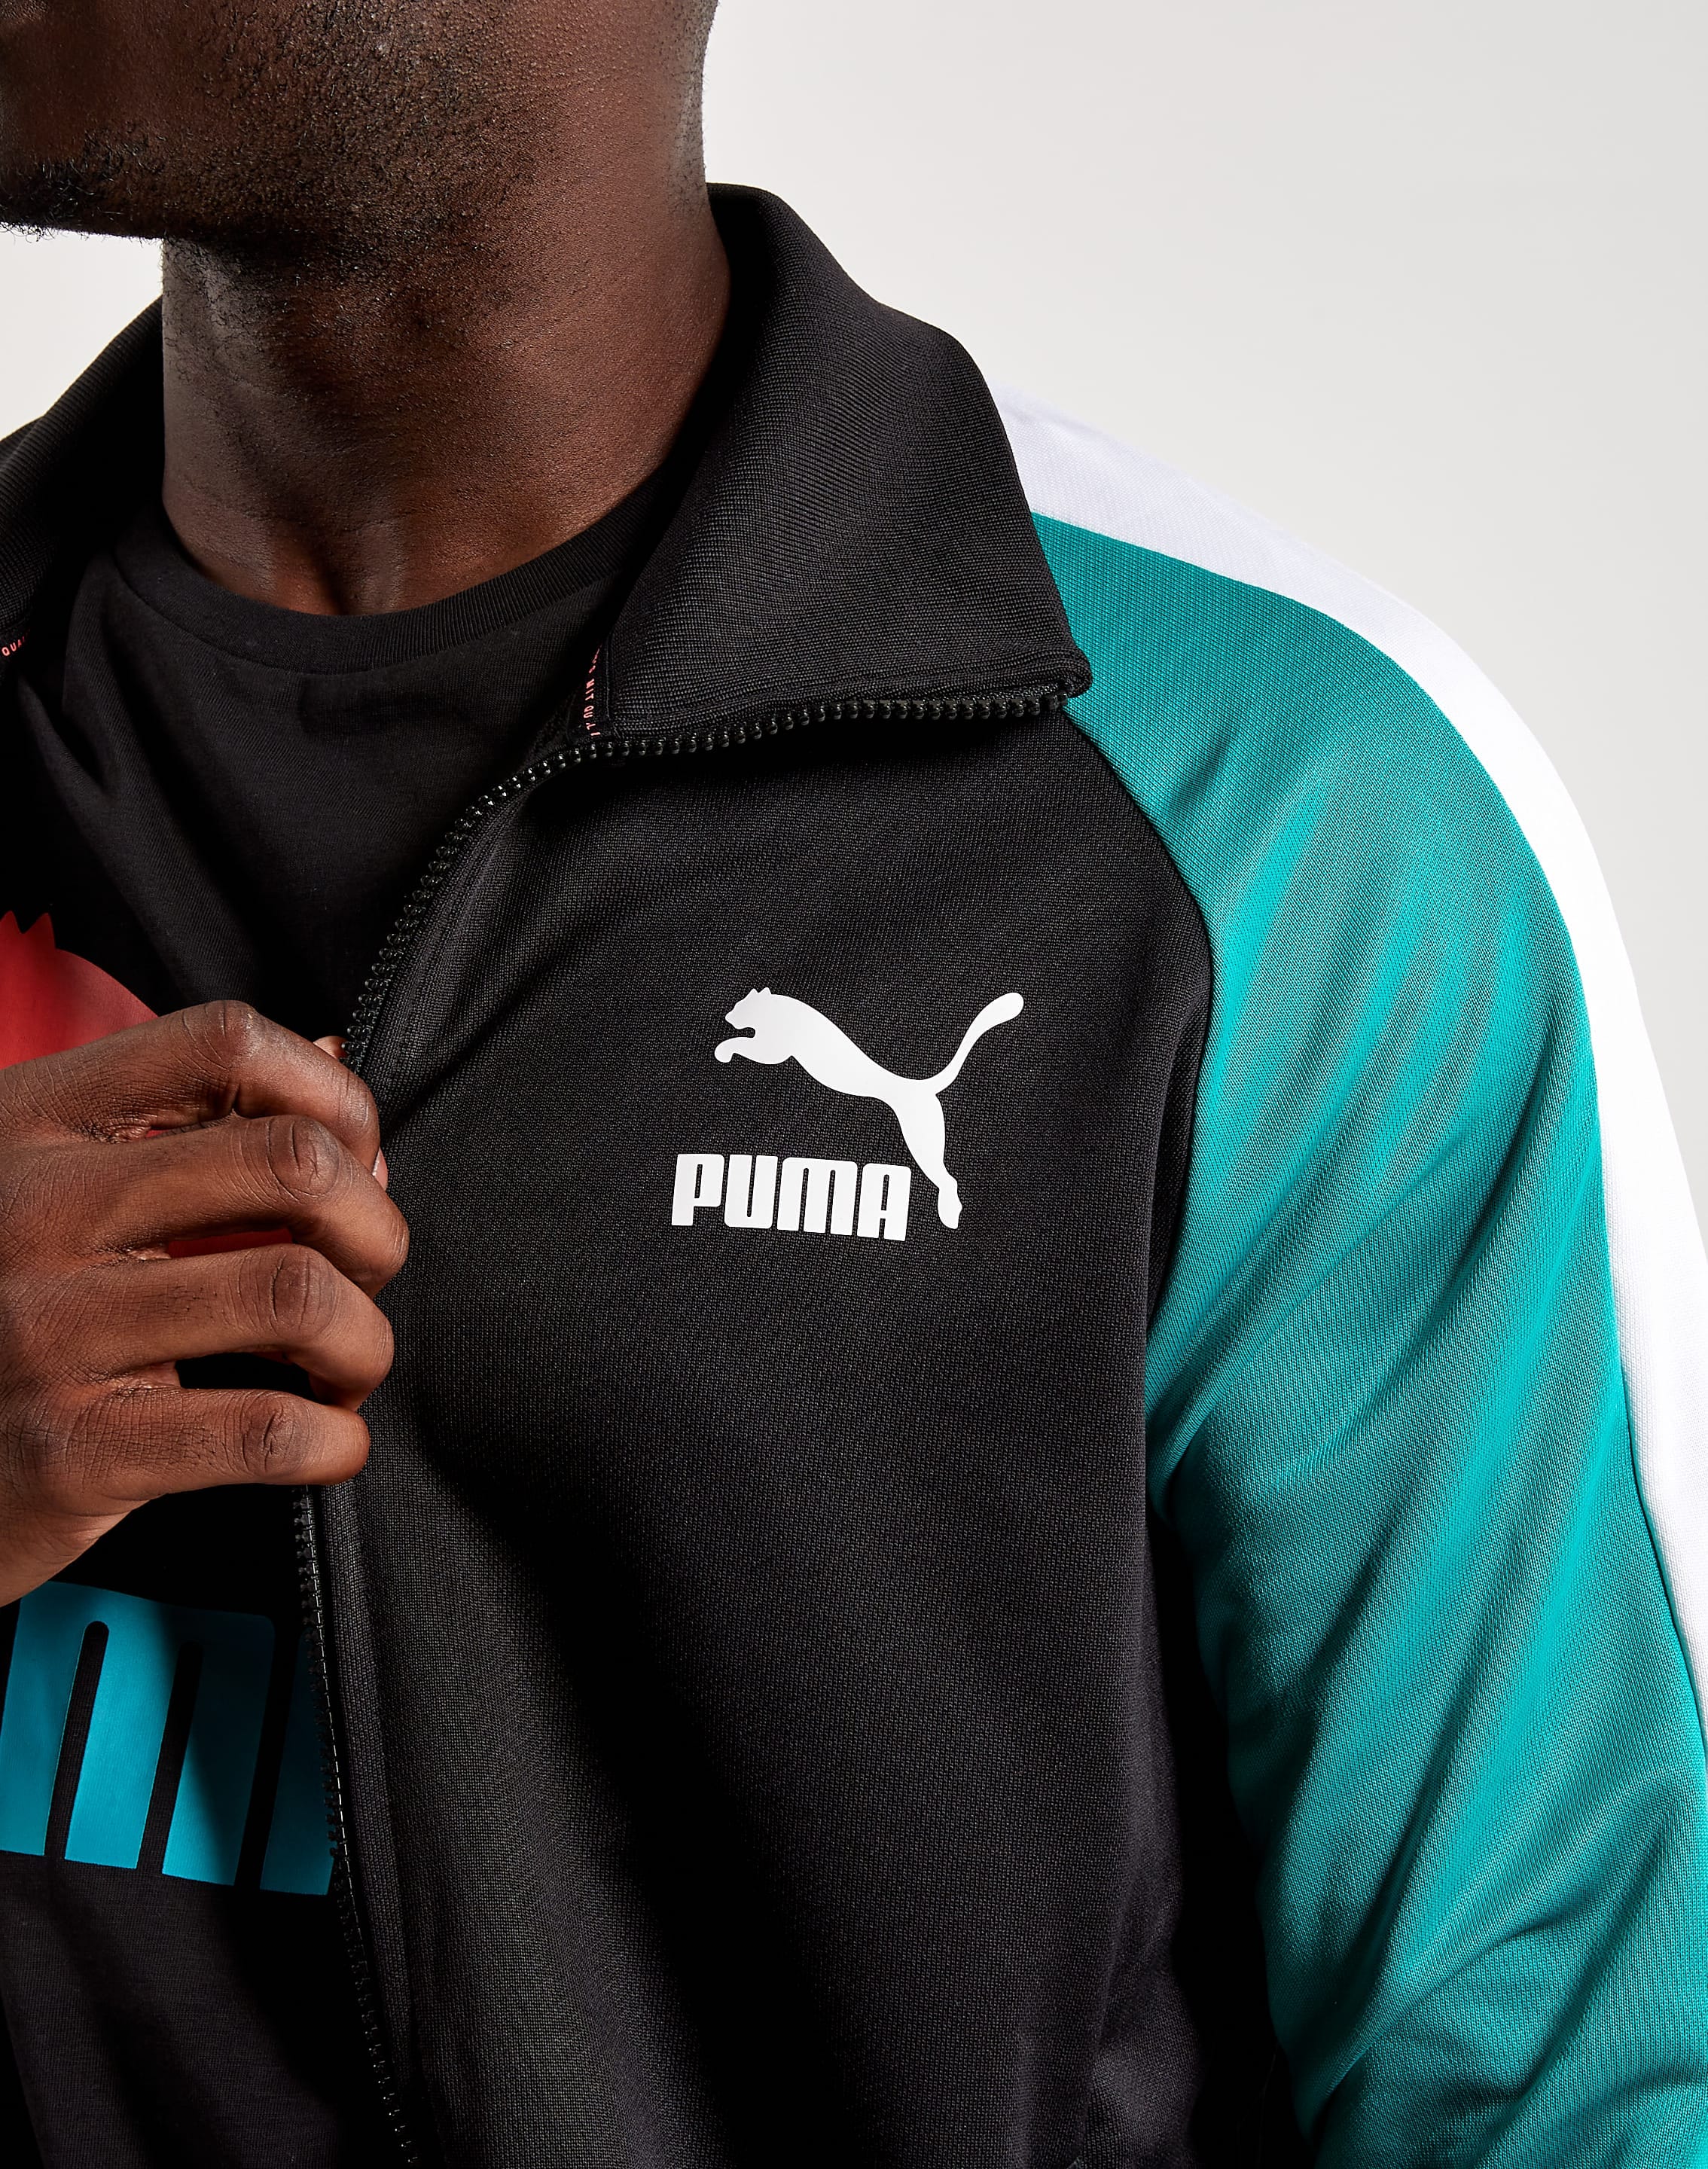 – T7 Iconic DTLR Puma Track Jacket